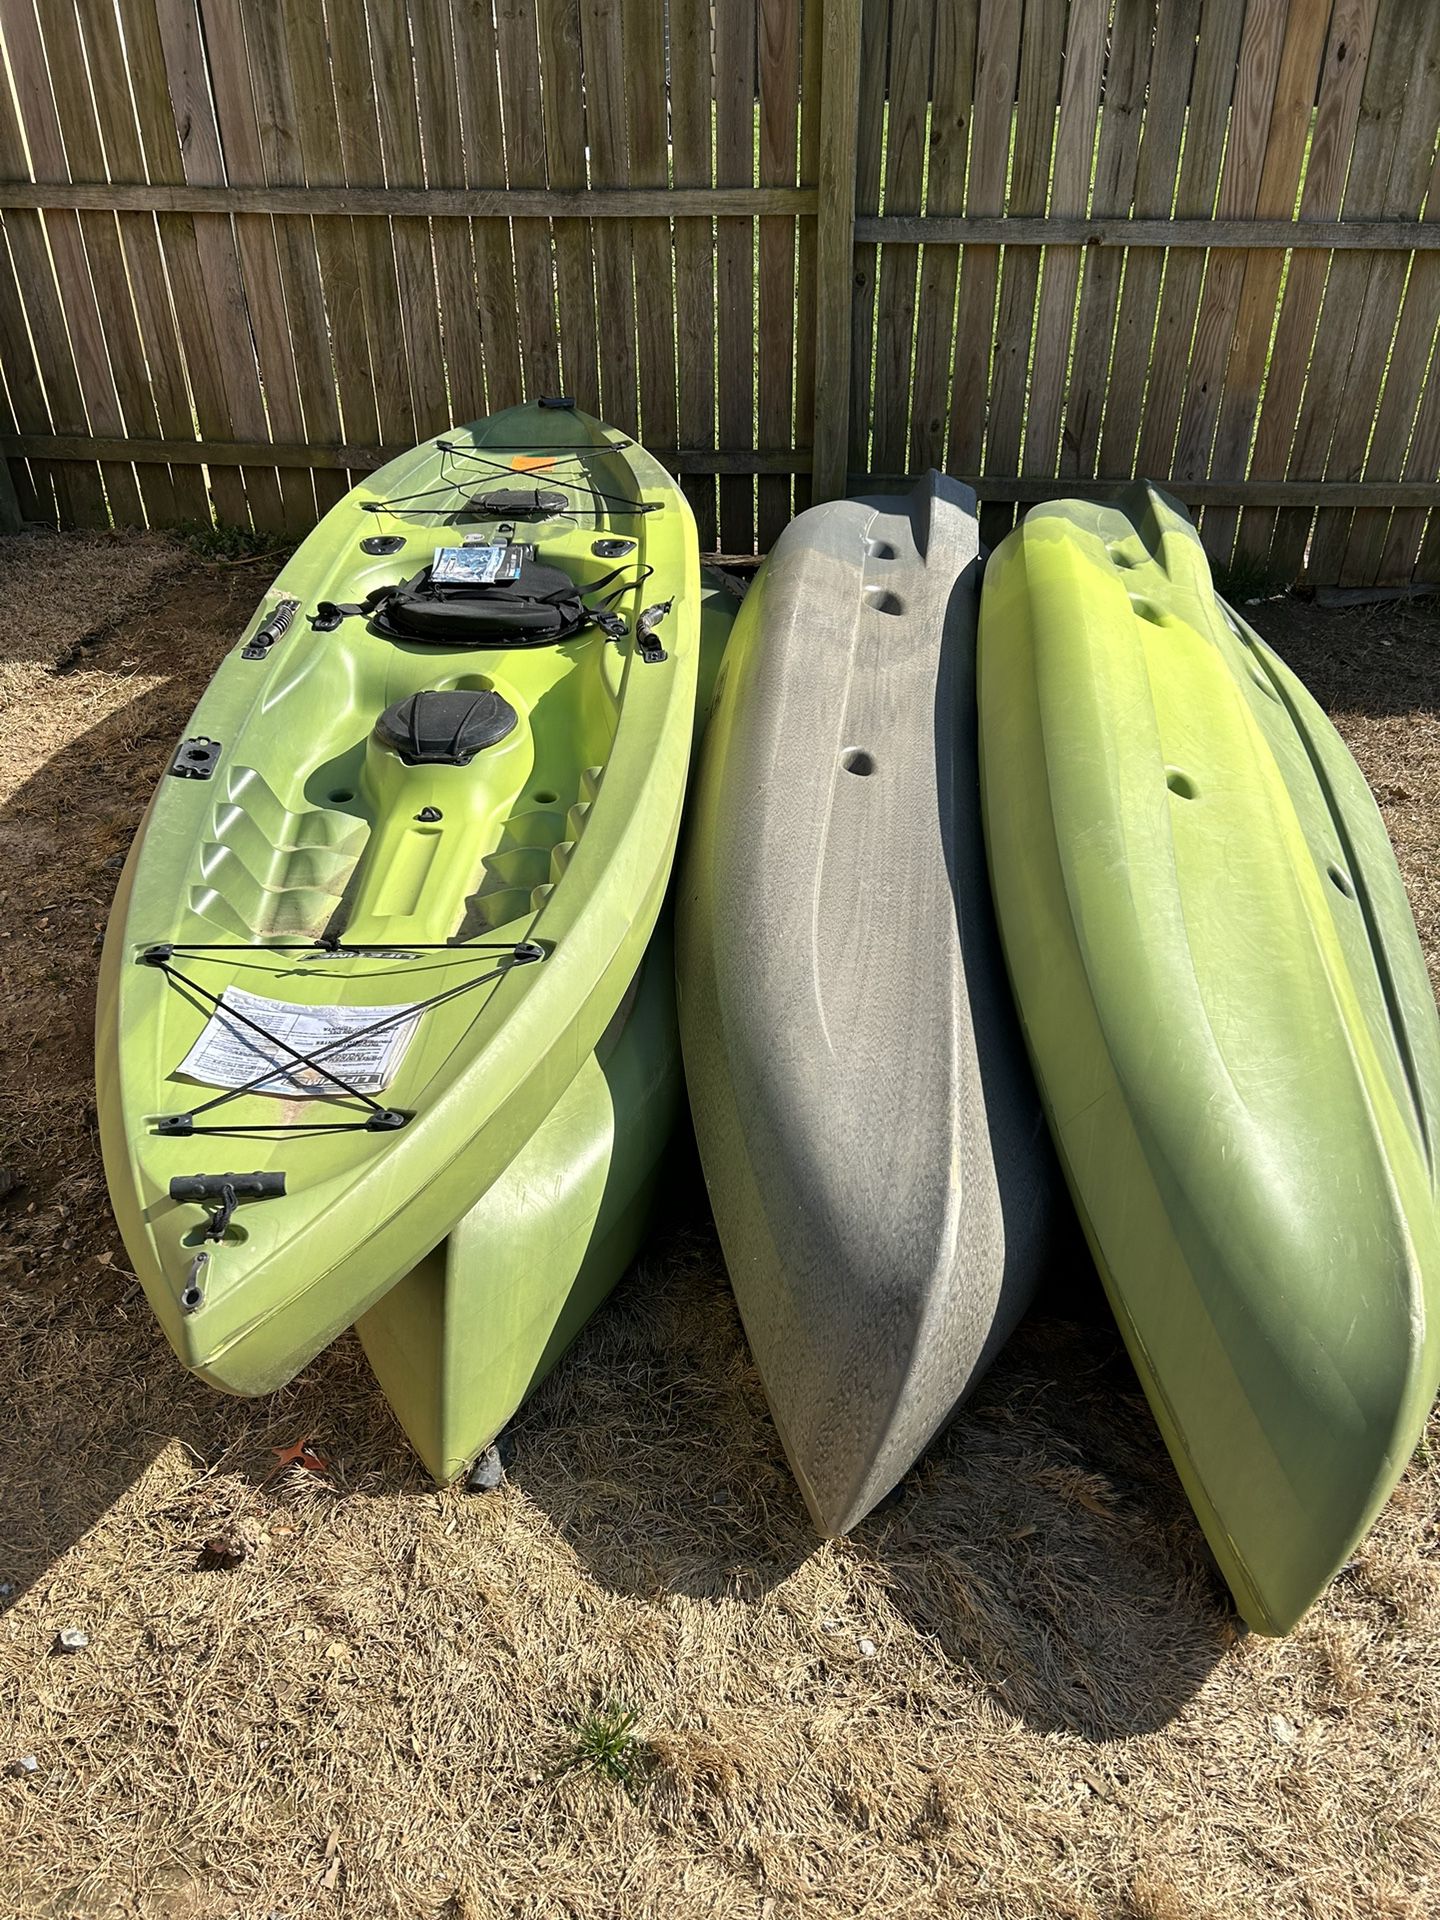 4 1 Man Kayaks For Sale $50 Each Buy 1 Or All